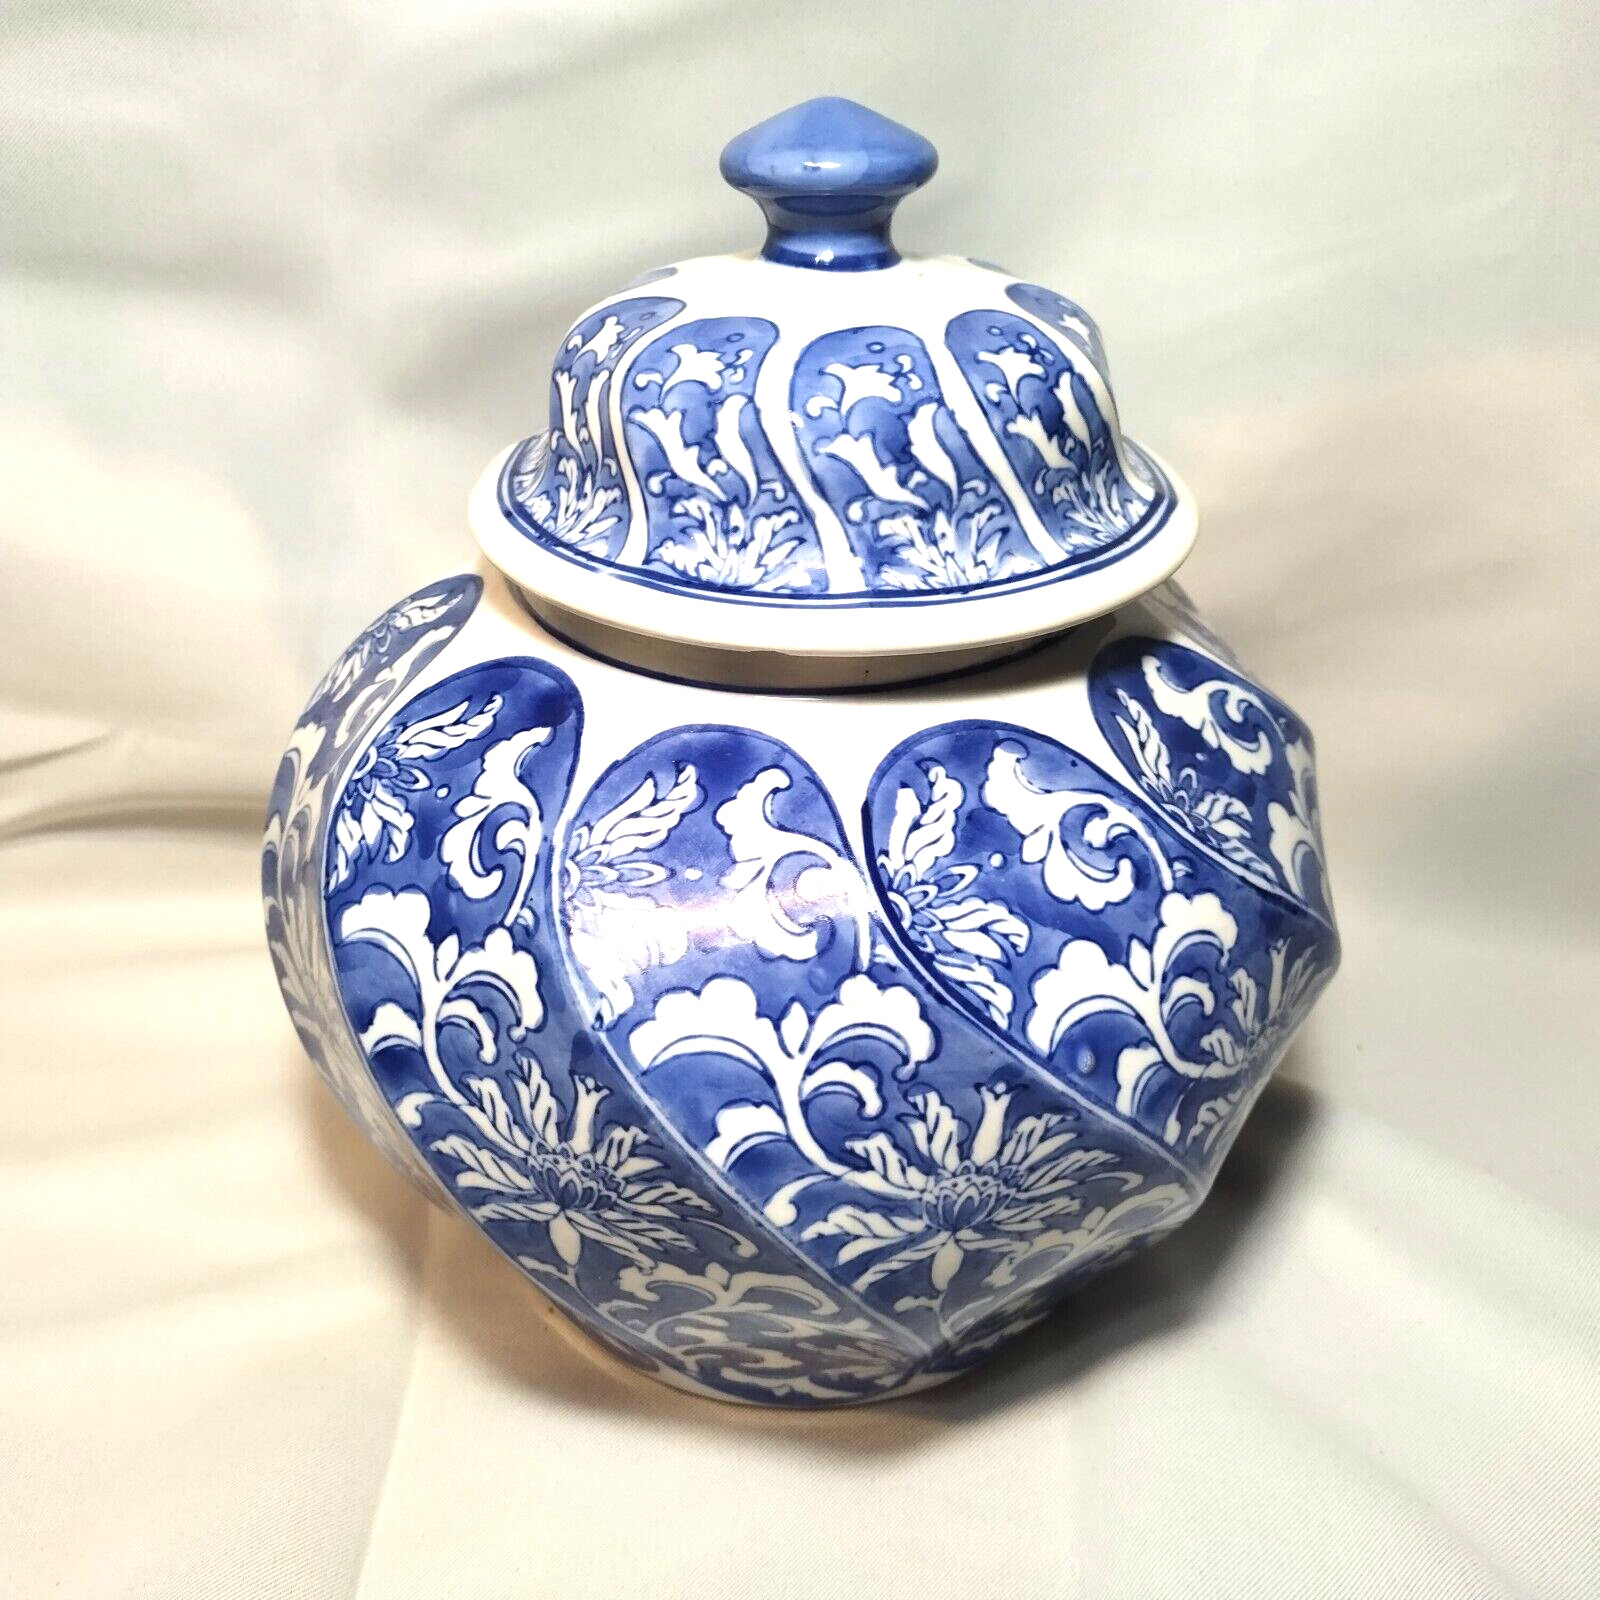 VERY LARGE ASIAN GINGER JAR MADE IN CHINA BLUE AND WHITE 10